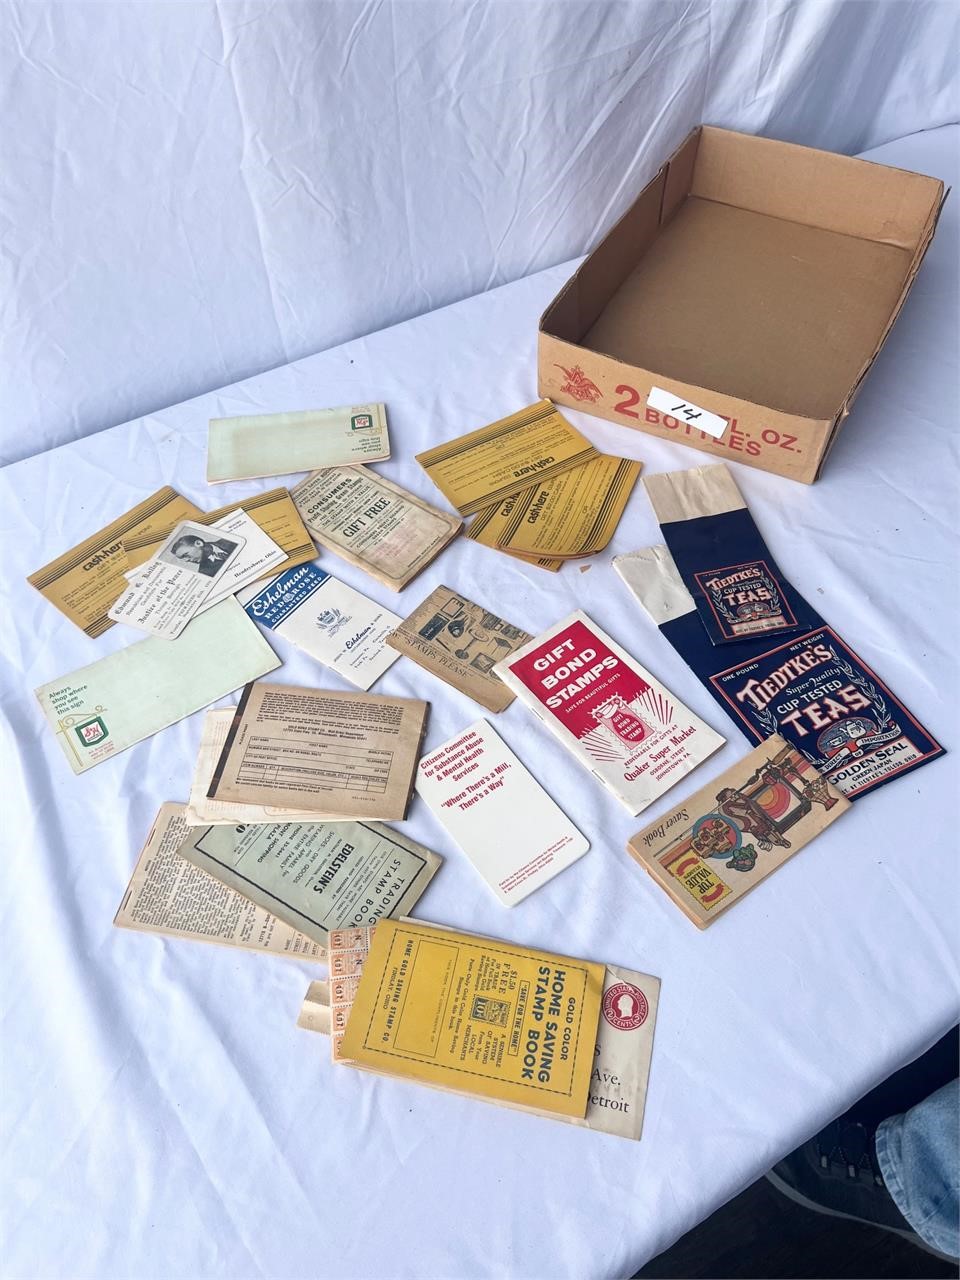 Miscellaneous Stamp Books and Paper Items